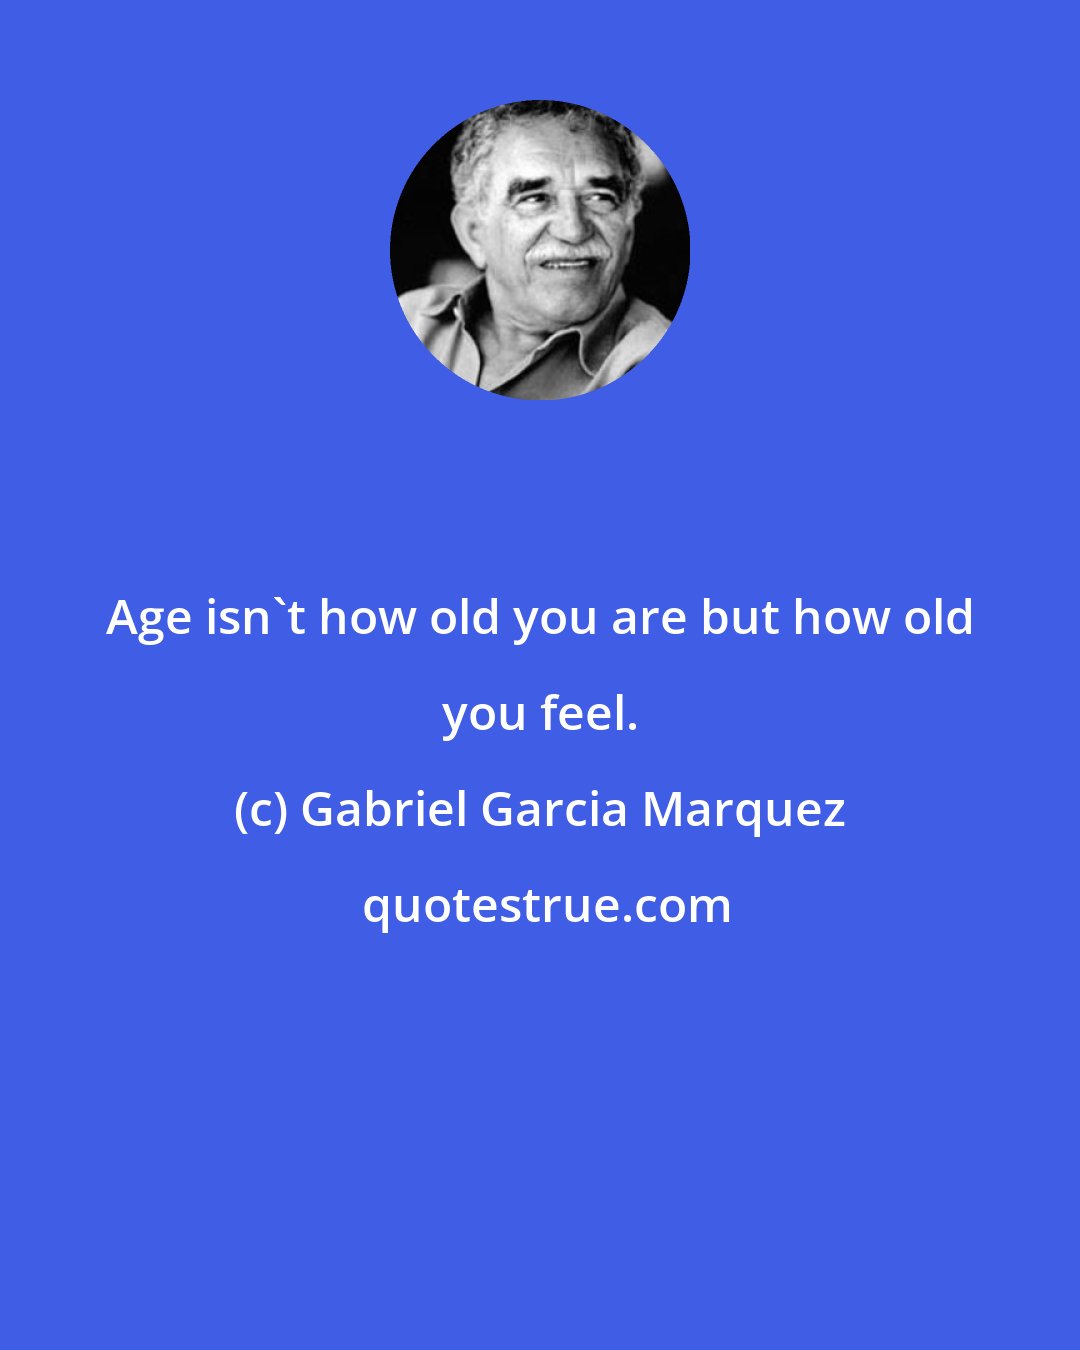 Gabriel Garcia Marquez: Age isn't how old you are but how old you feel.